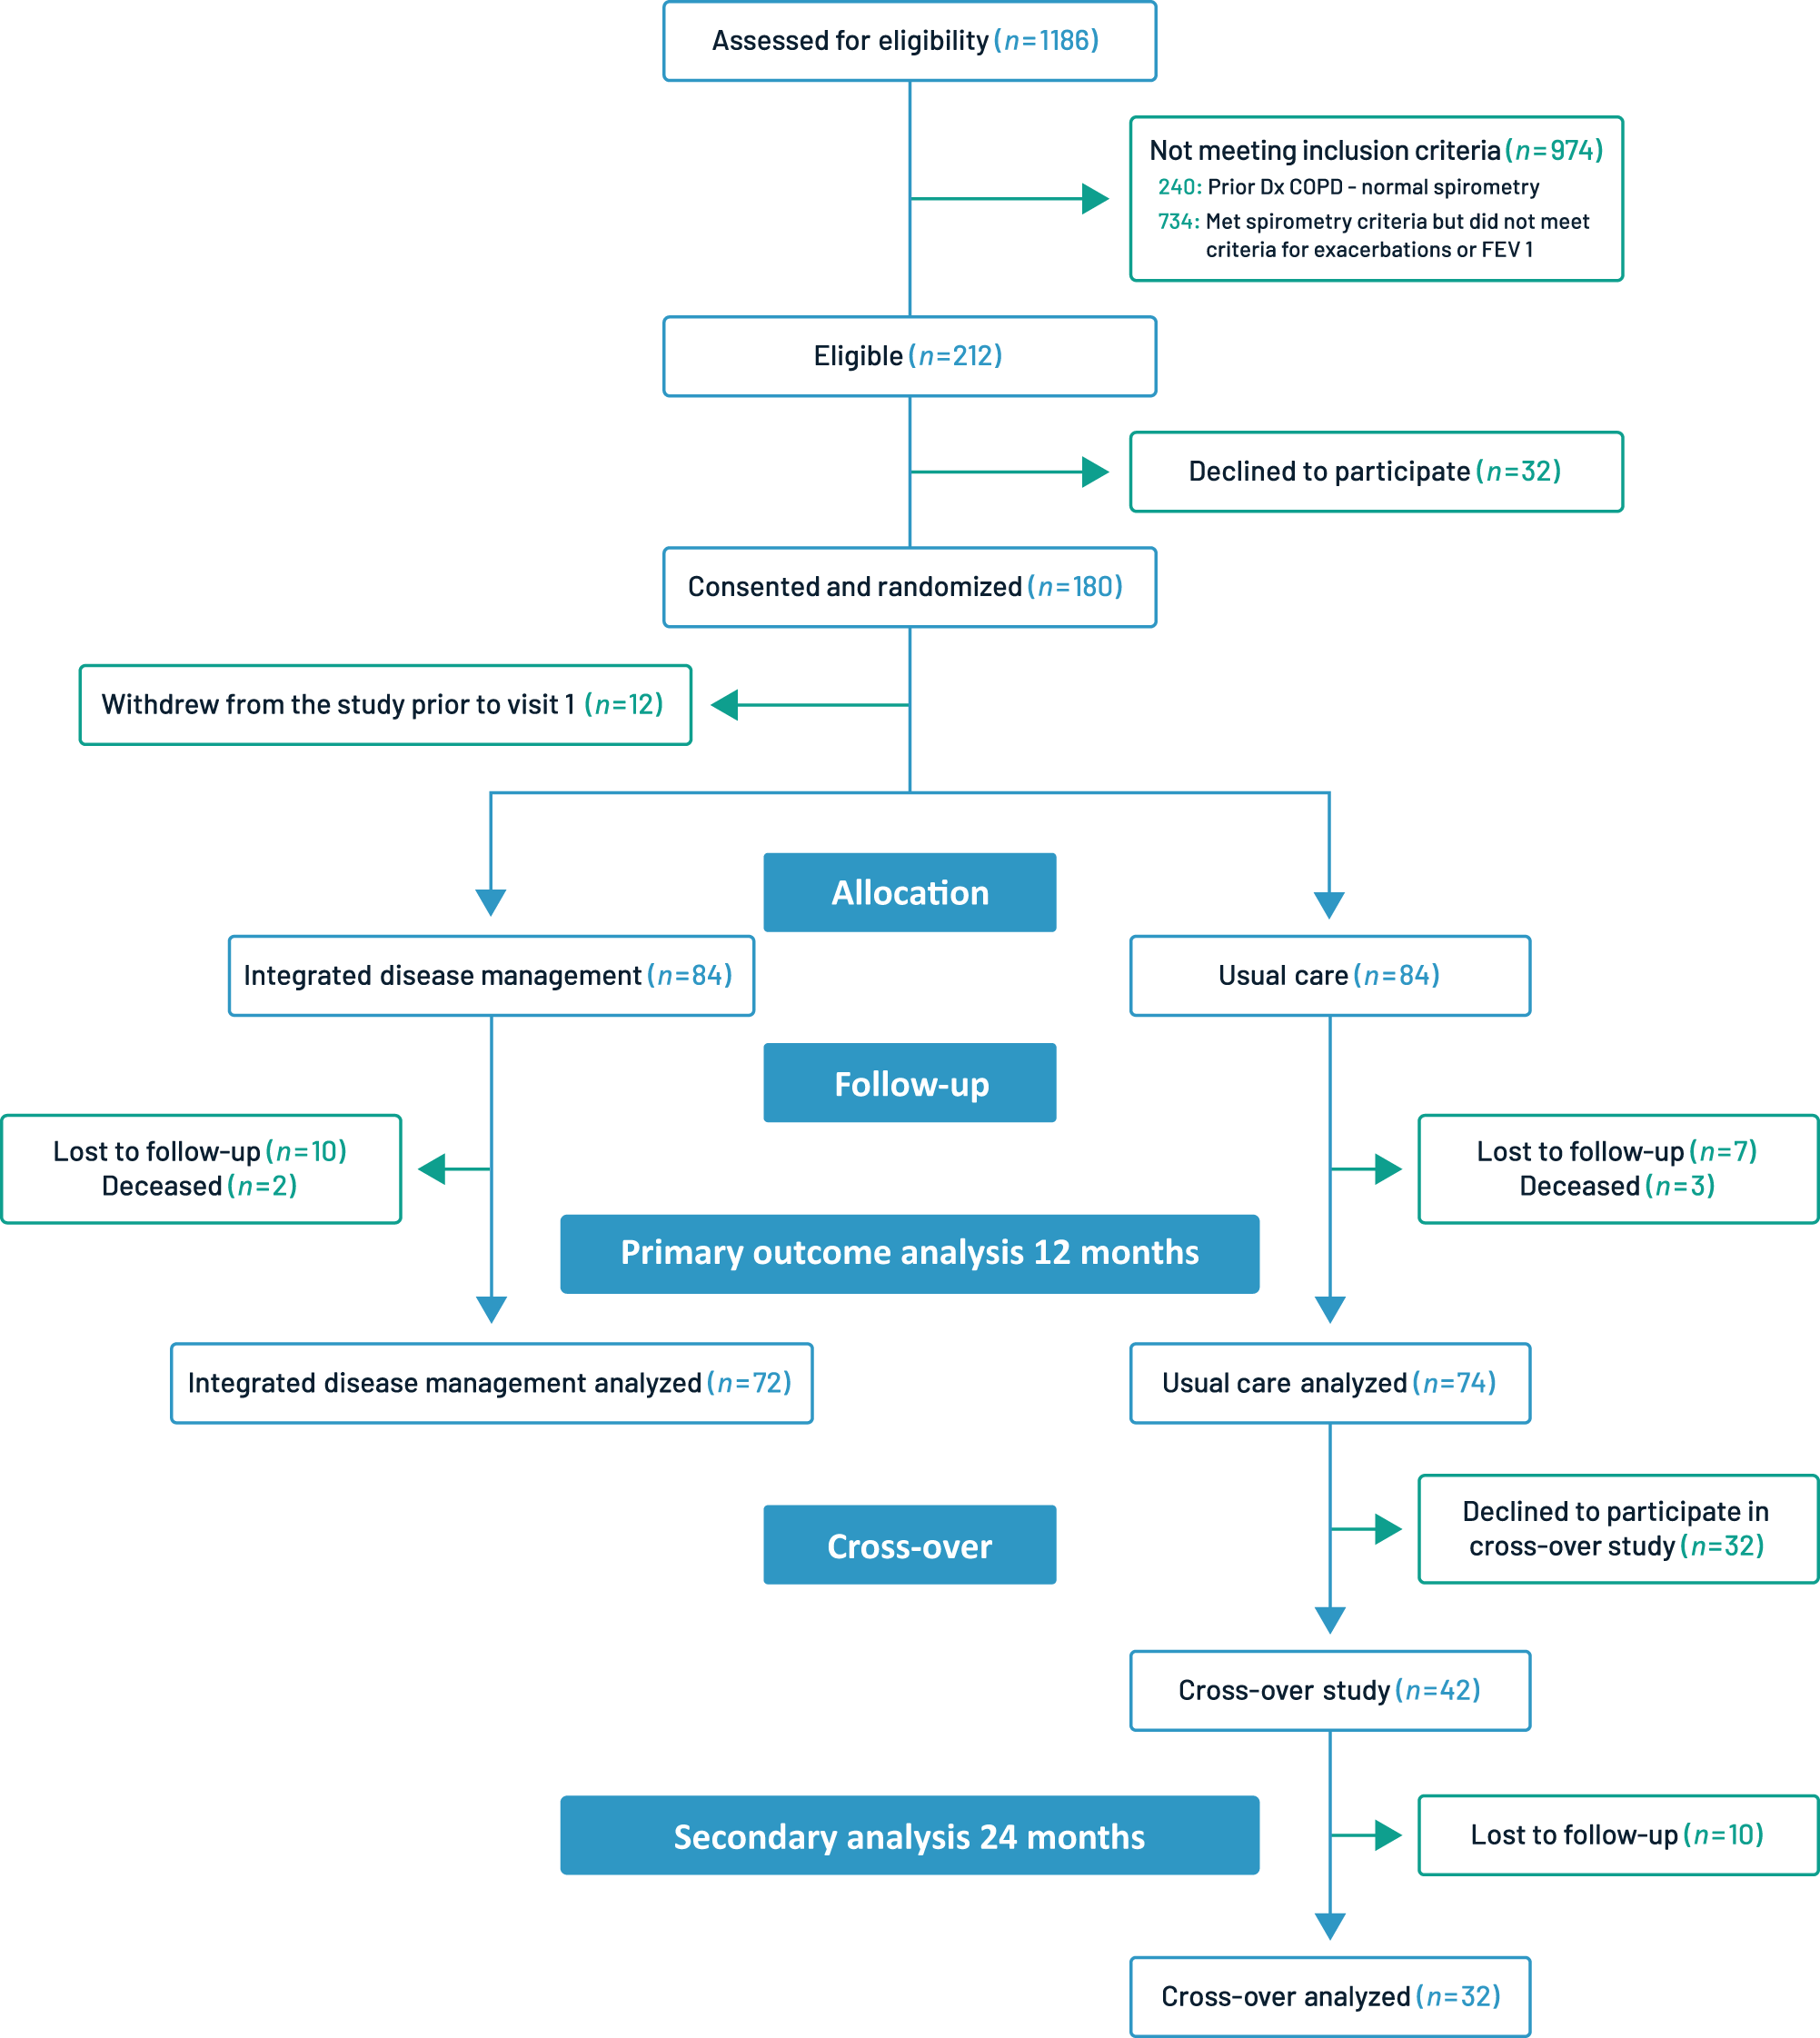 Copd Guidelines Chart